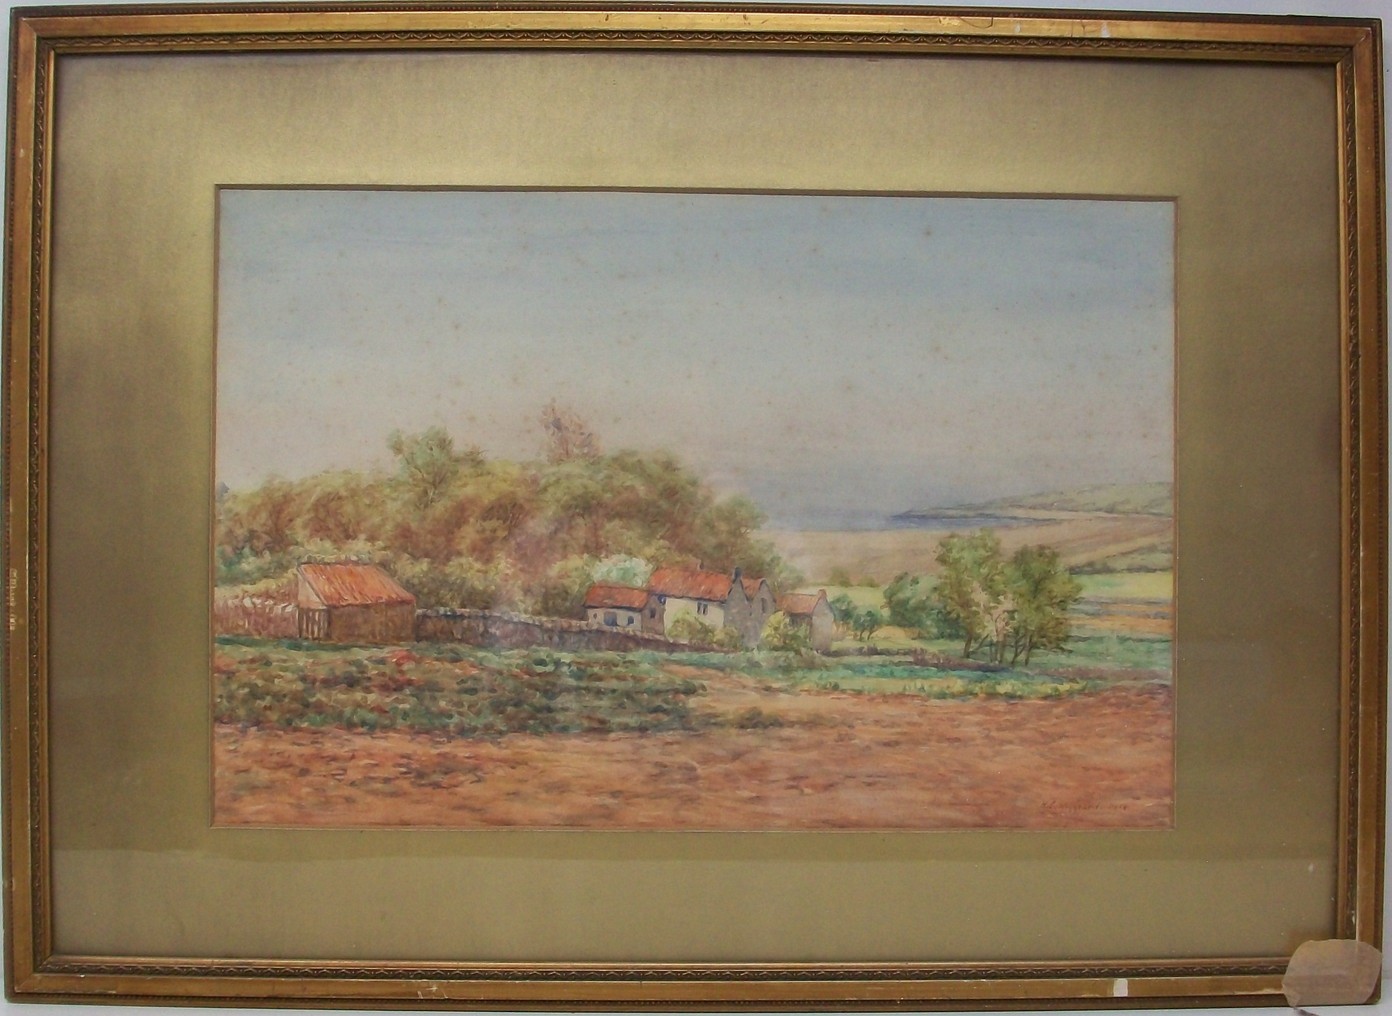 H. C. Sheppard: a watercolour of a farmhouse in countryside setting, signed and dated 1914 lower